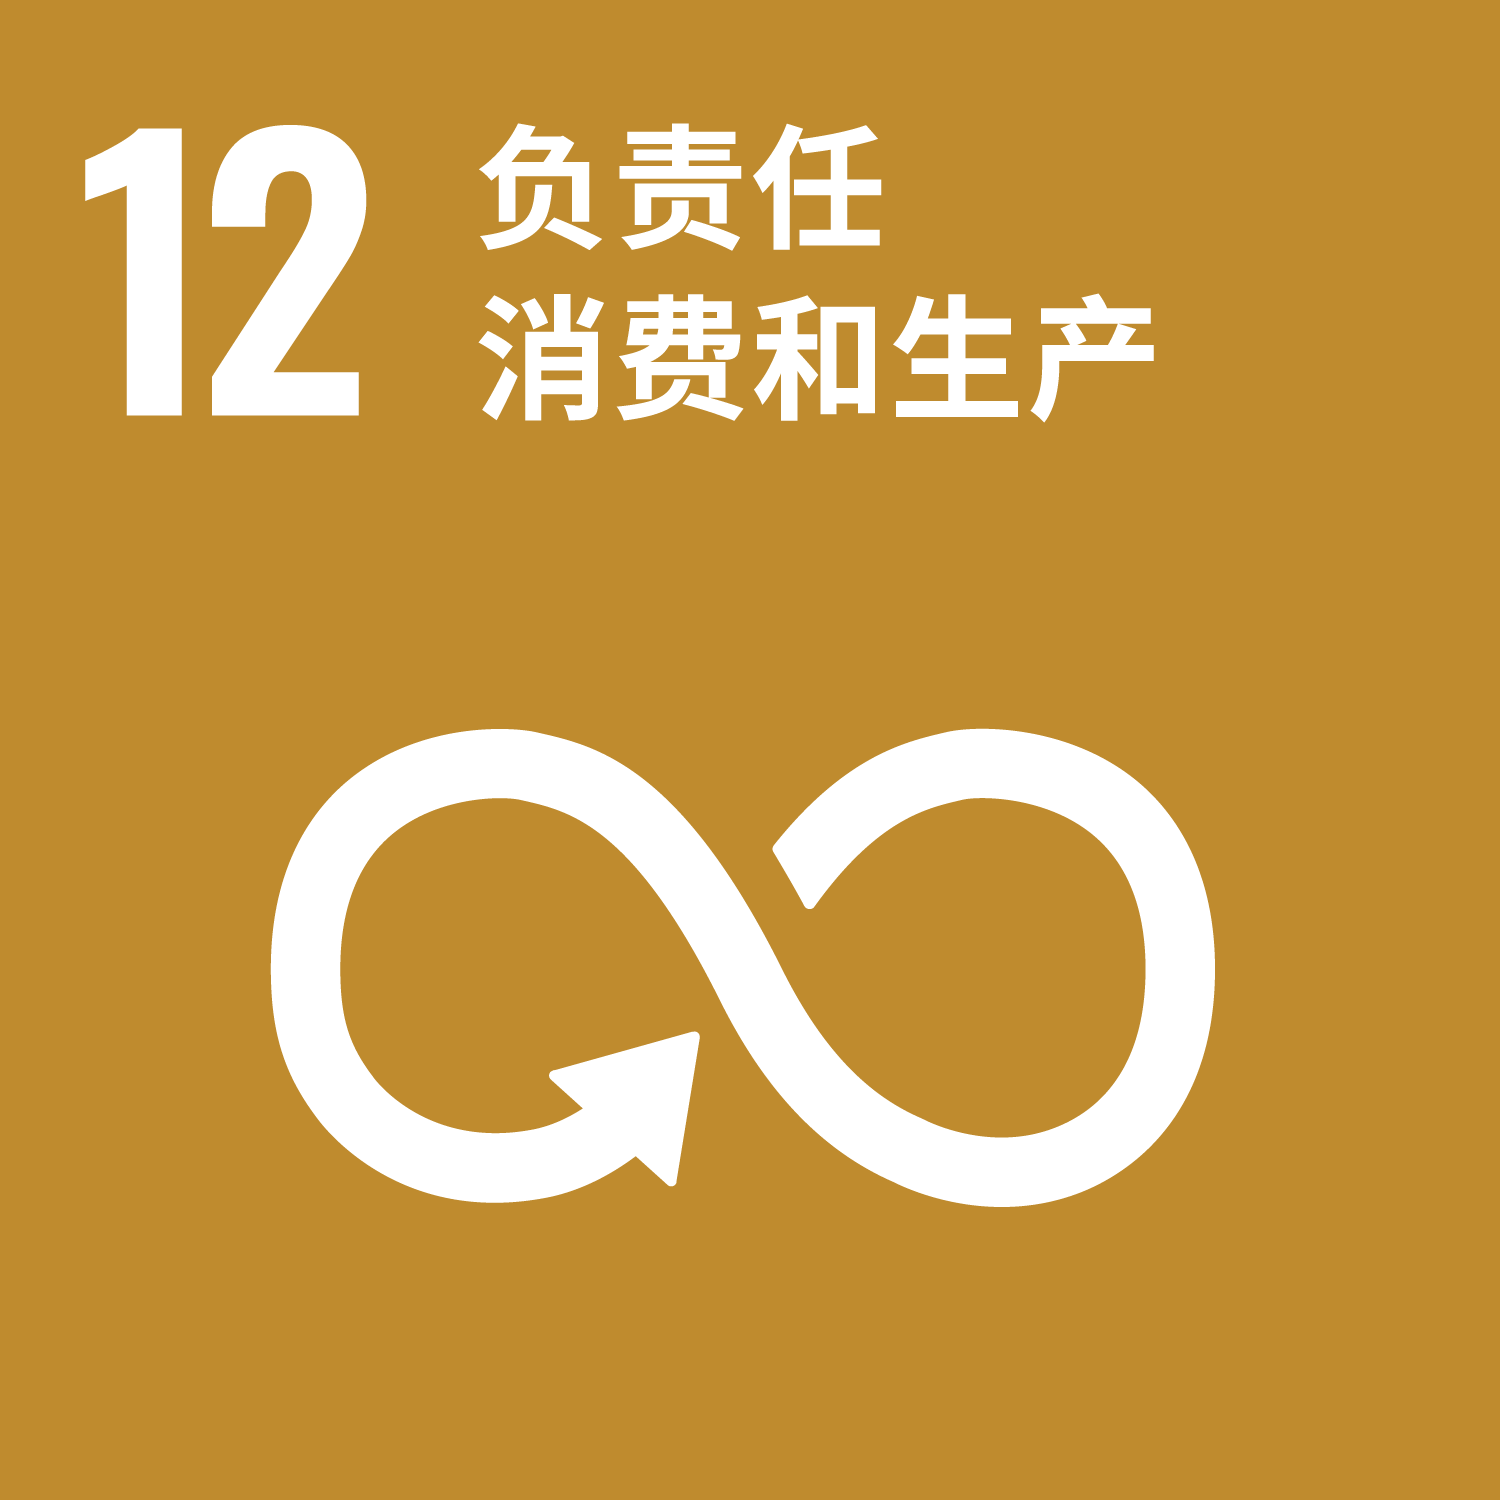 Goal 12: Responsible consumption and production 